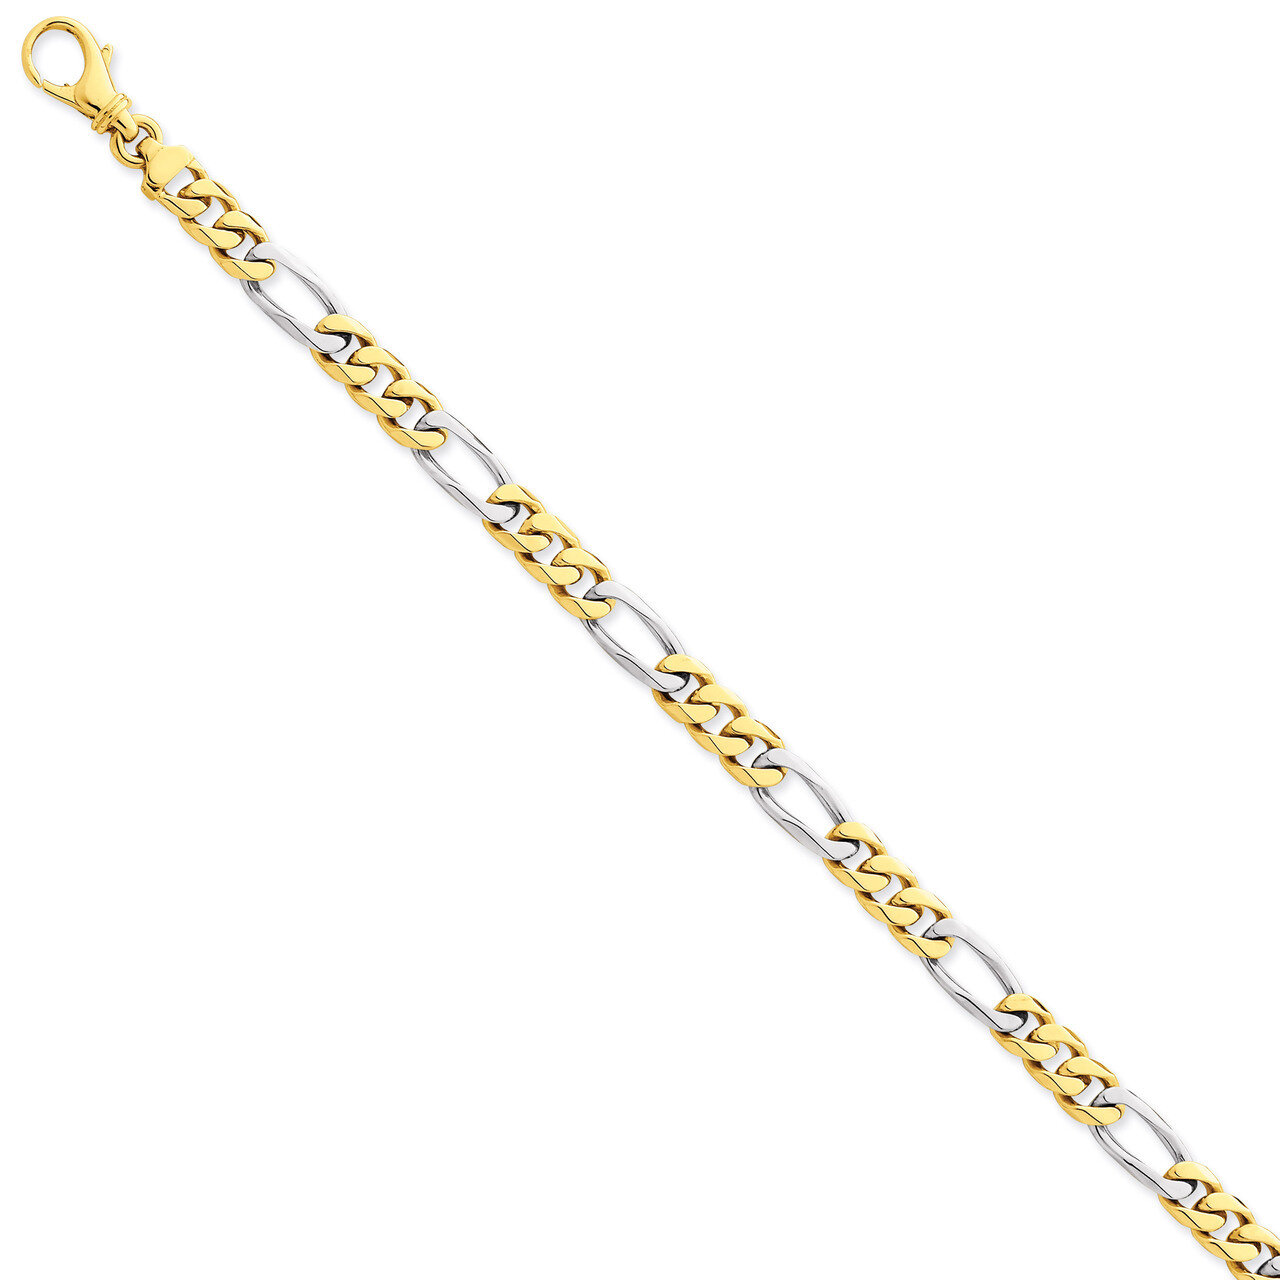 6.2mm Polished Fancy Link Chain 22 Inch 14k Two-Tone Gold LK488-22